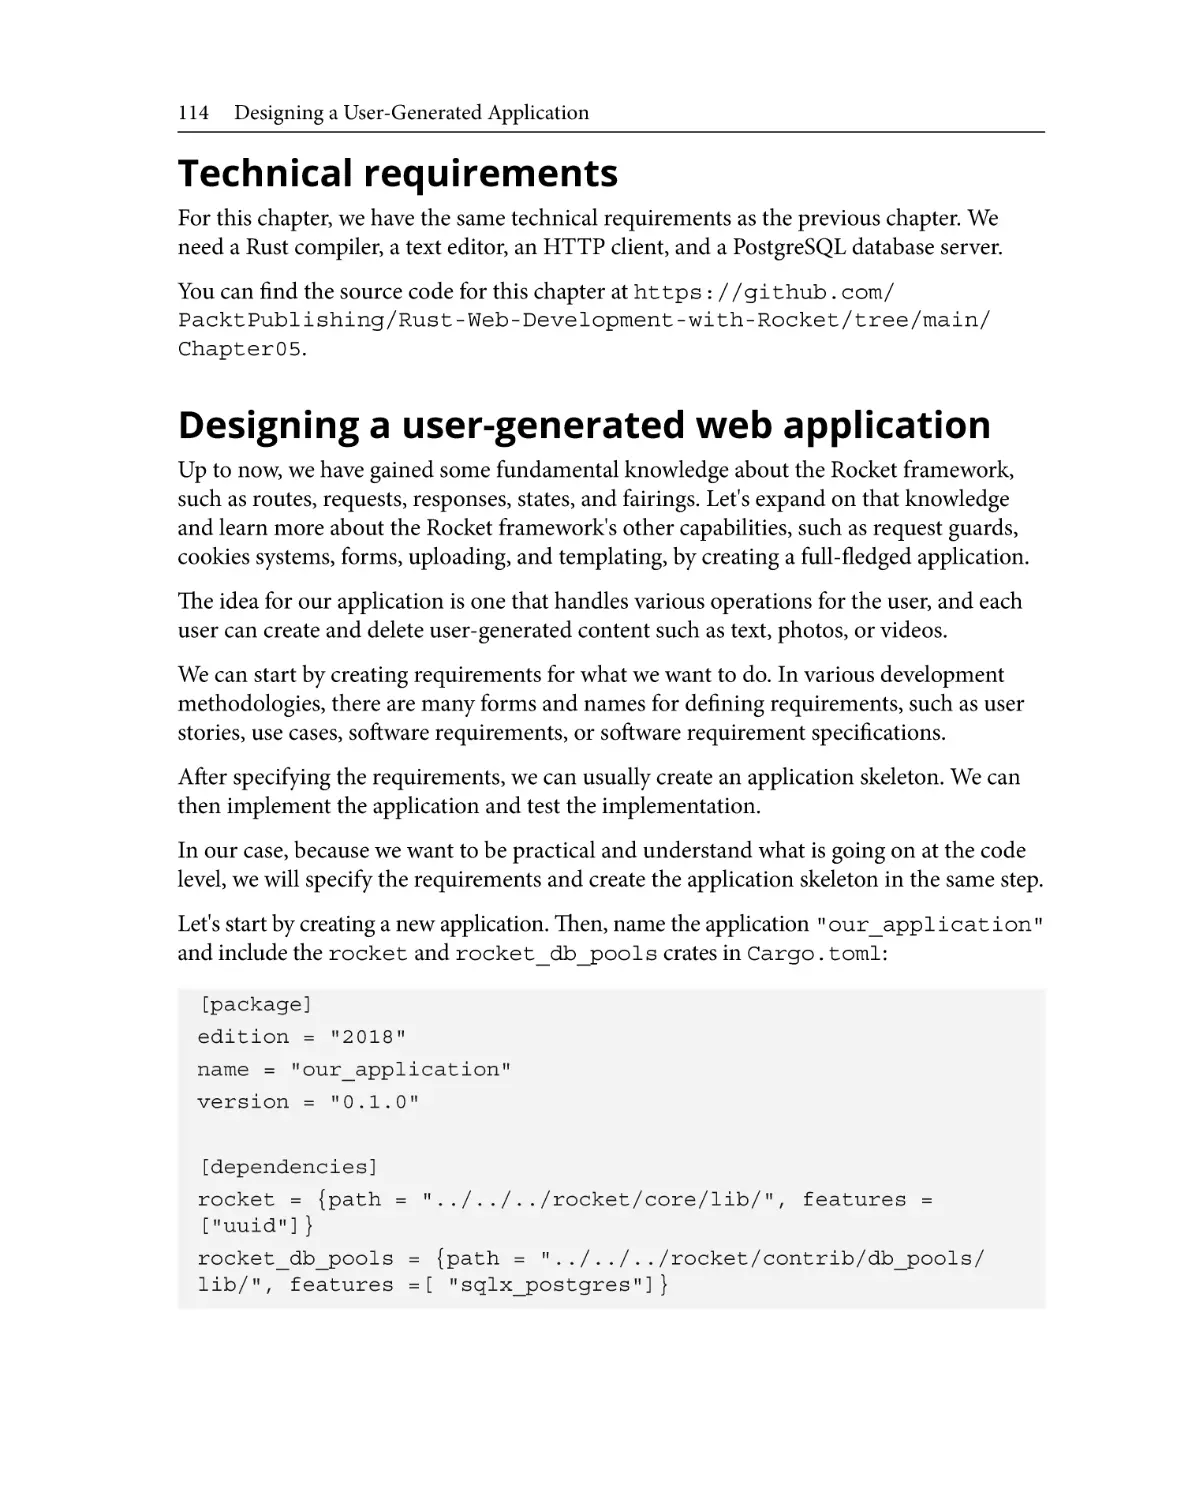 Technical requirements
Designing a user-generated web application